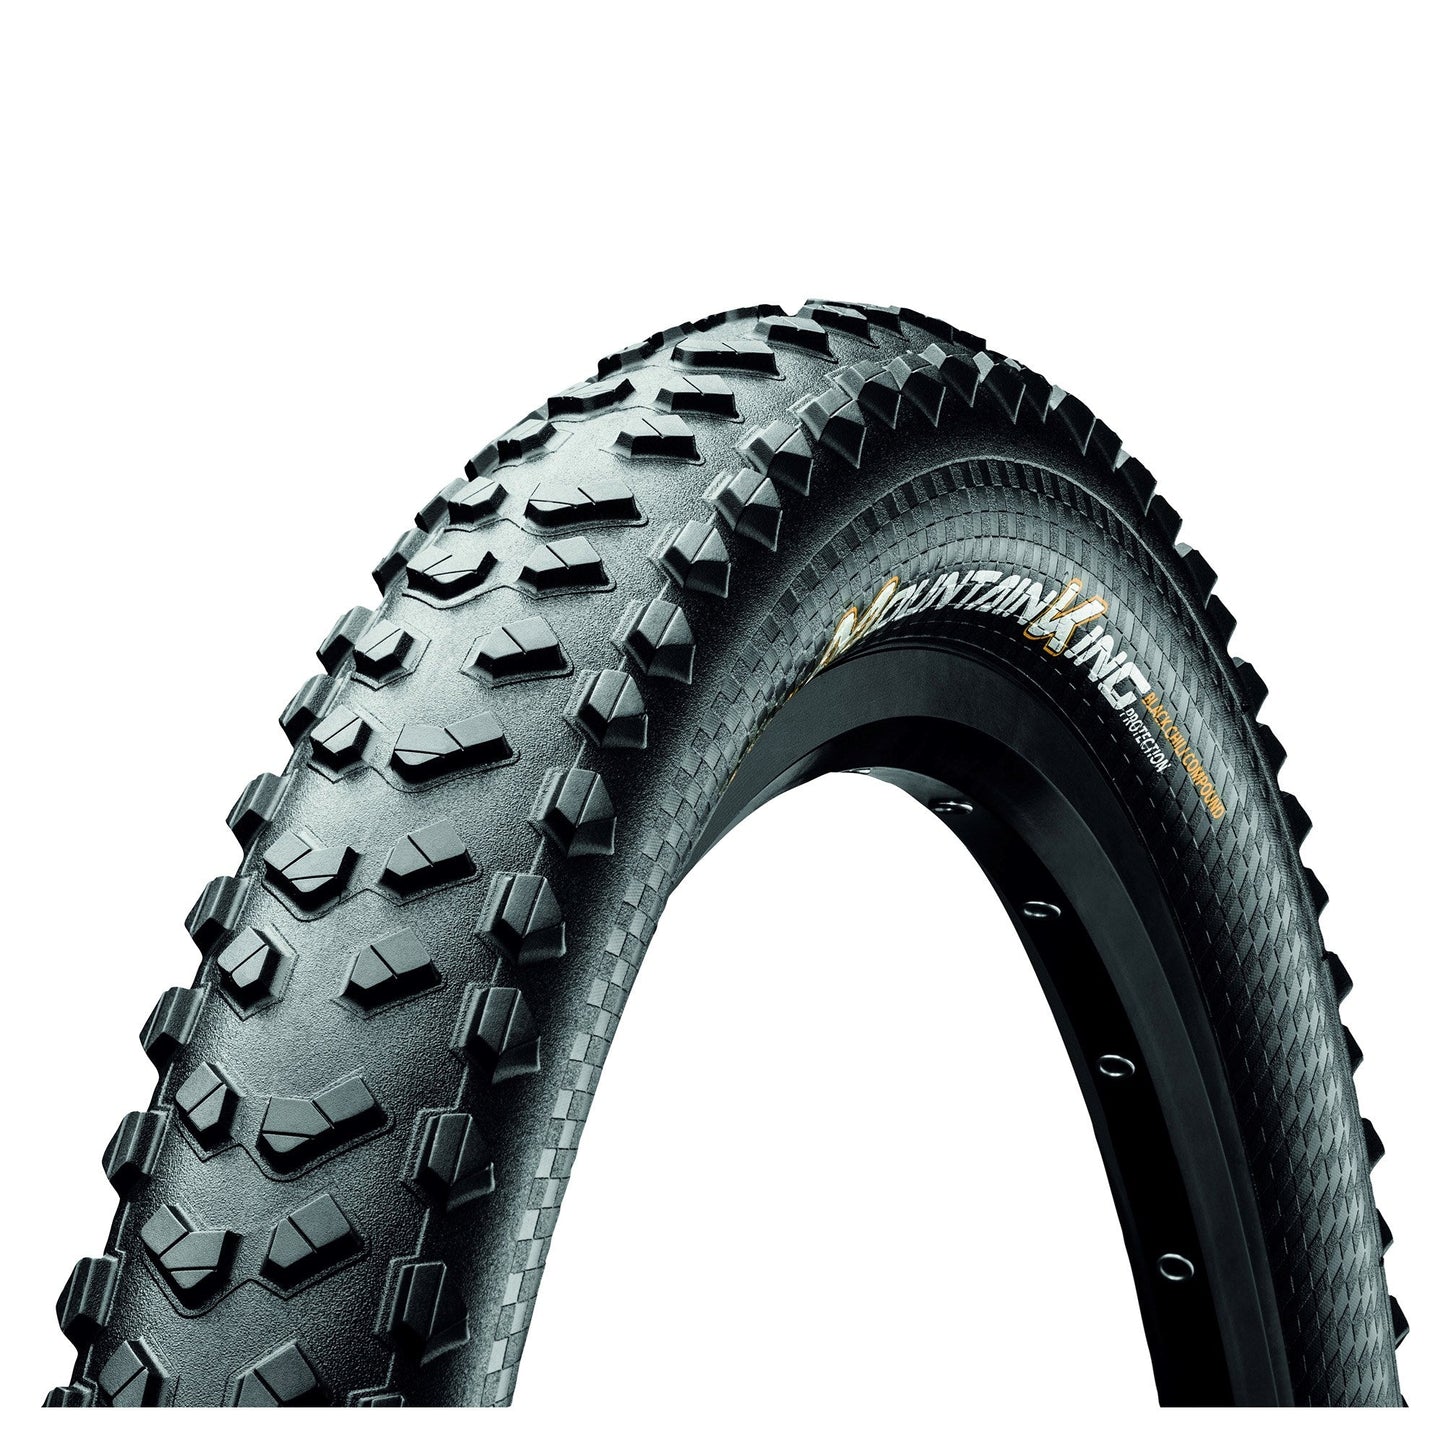 CONTINENTAL MOUNTAIN KING 2.3 PROTECTION 27.5X2.30" FOLDING TYRE